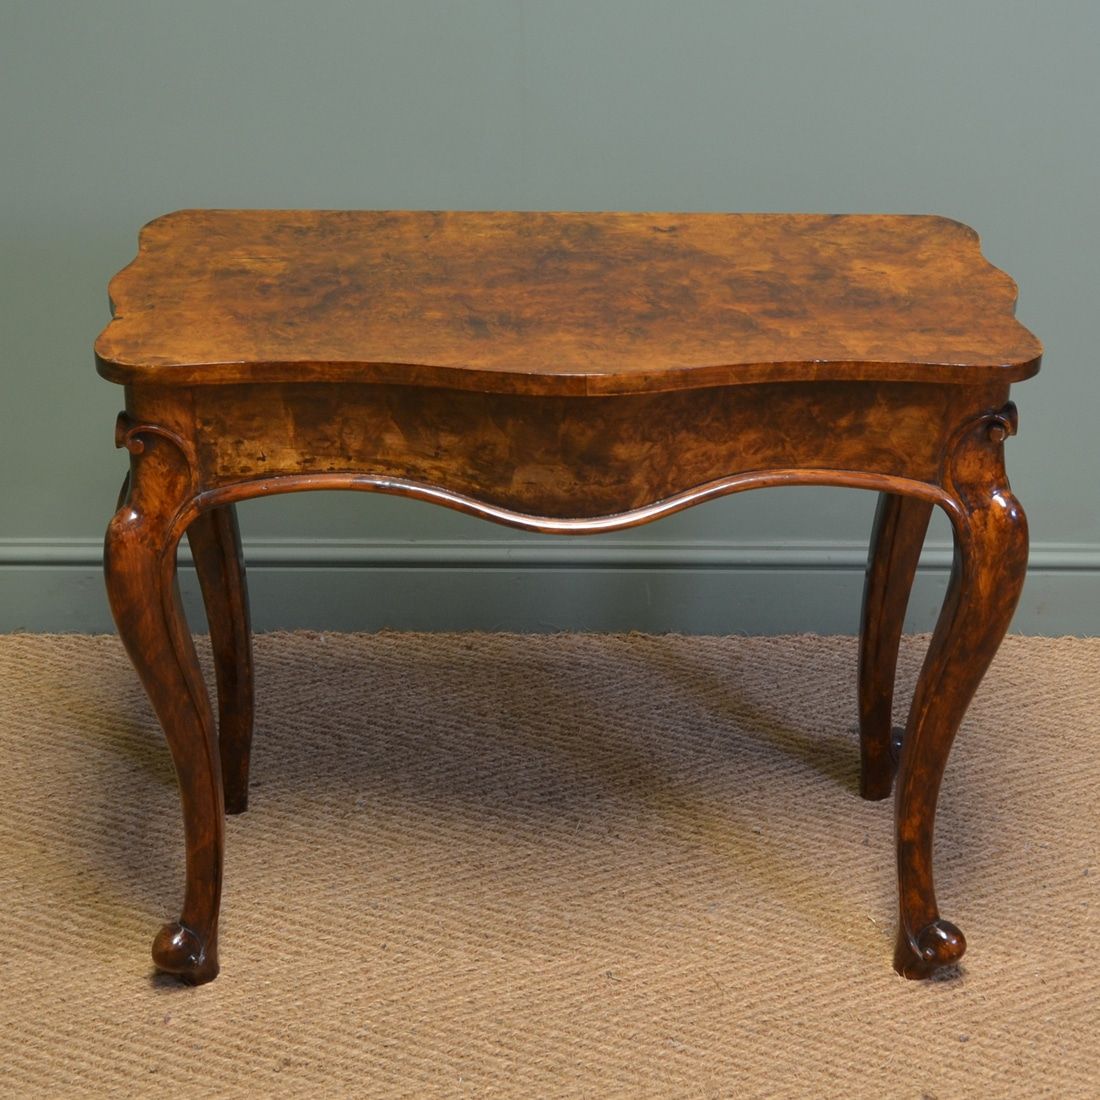 Striking Victorian Figured Walnut Antique Side / Console Intended For Vintage Coal Console Tables (View 13 of 20)